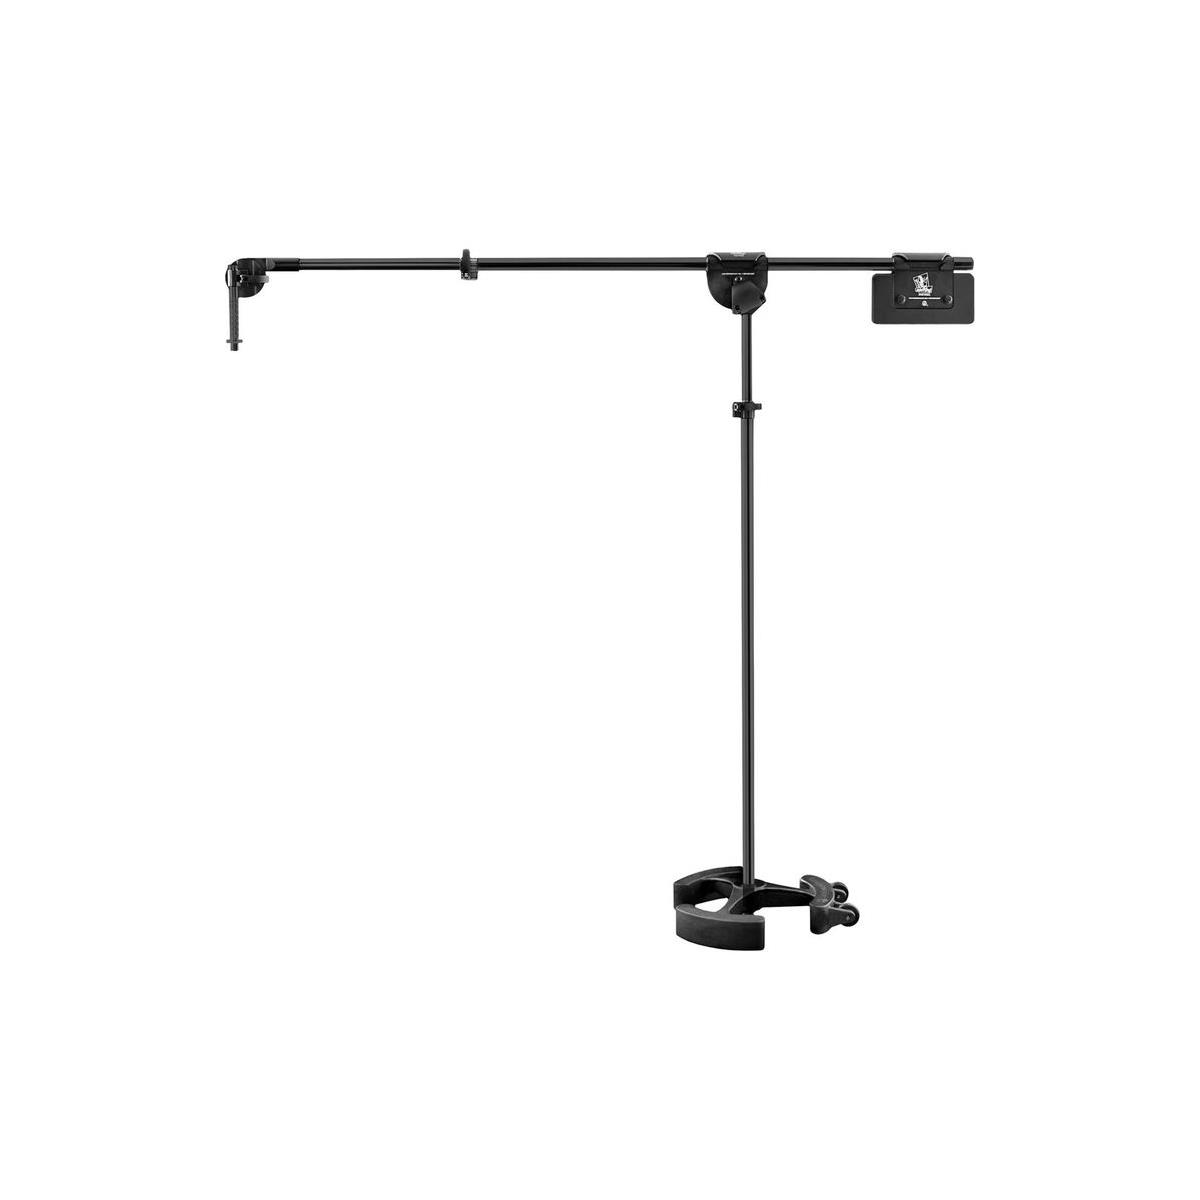 Image of Latch Lake micKing 2200 Boom Microphone Stand